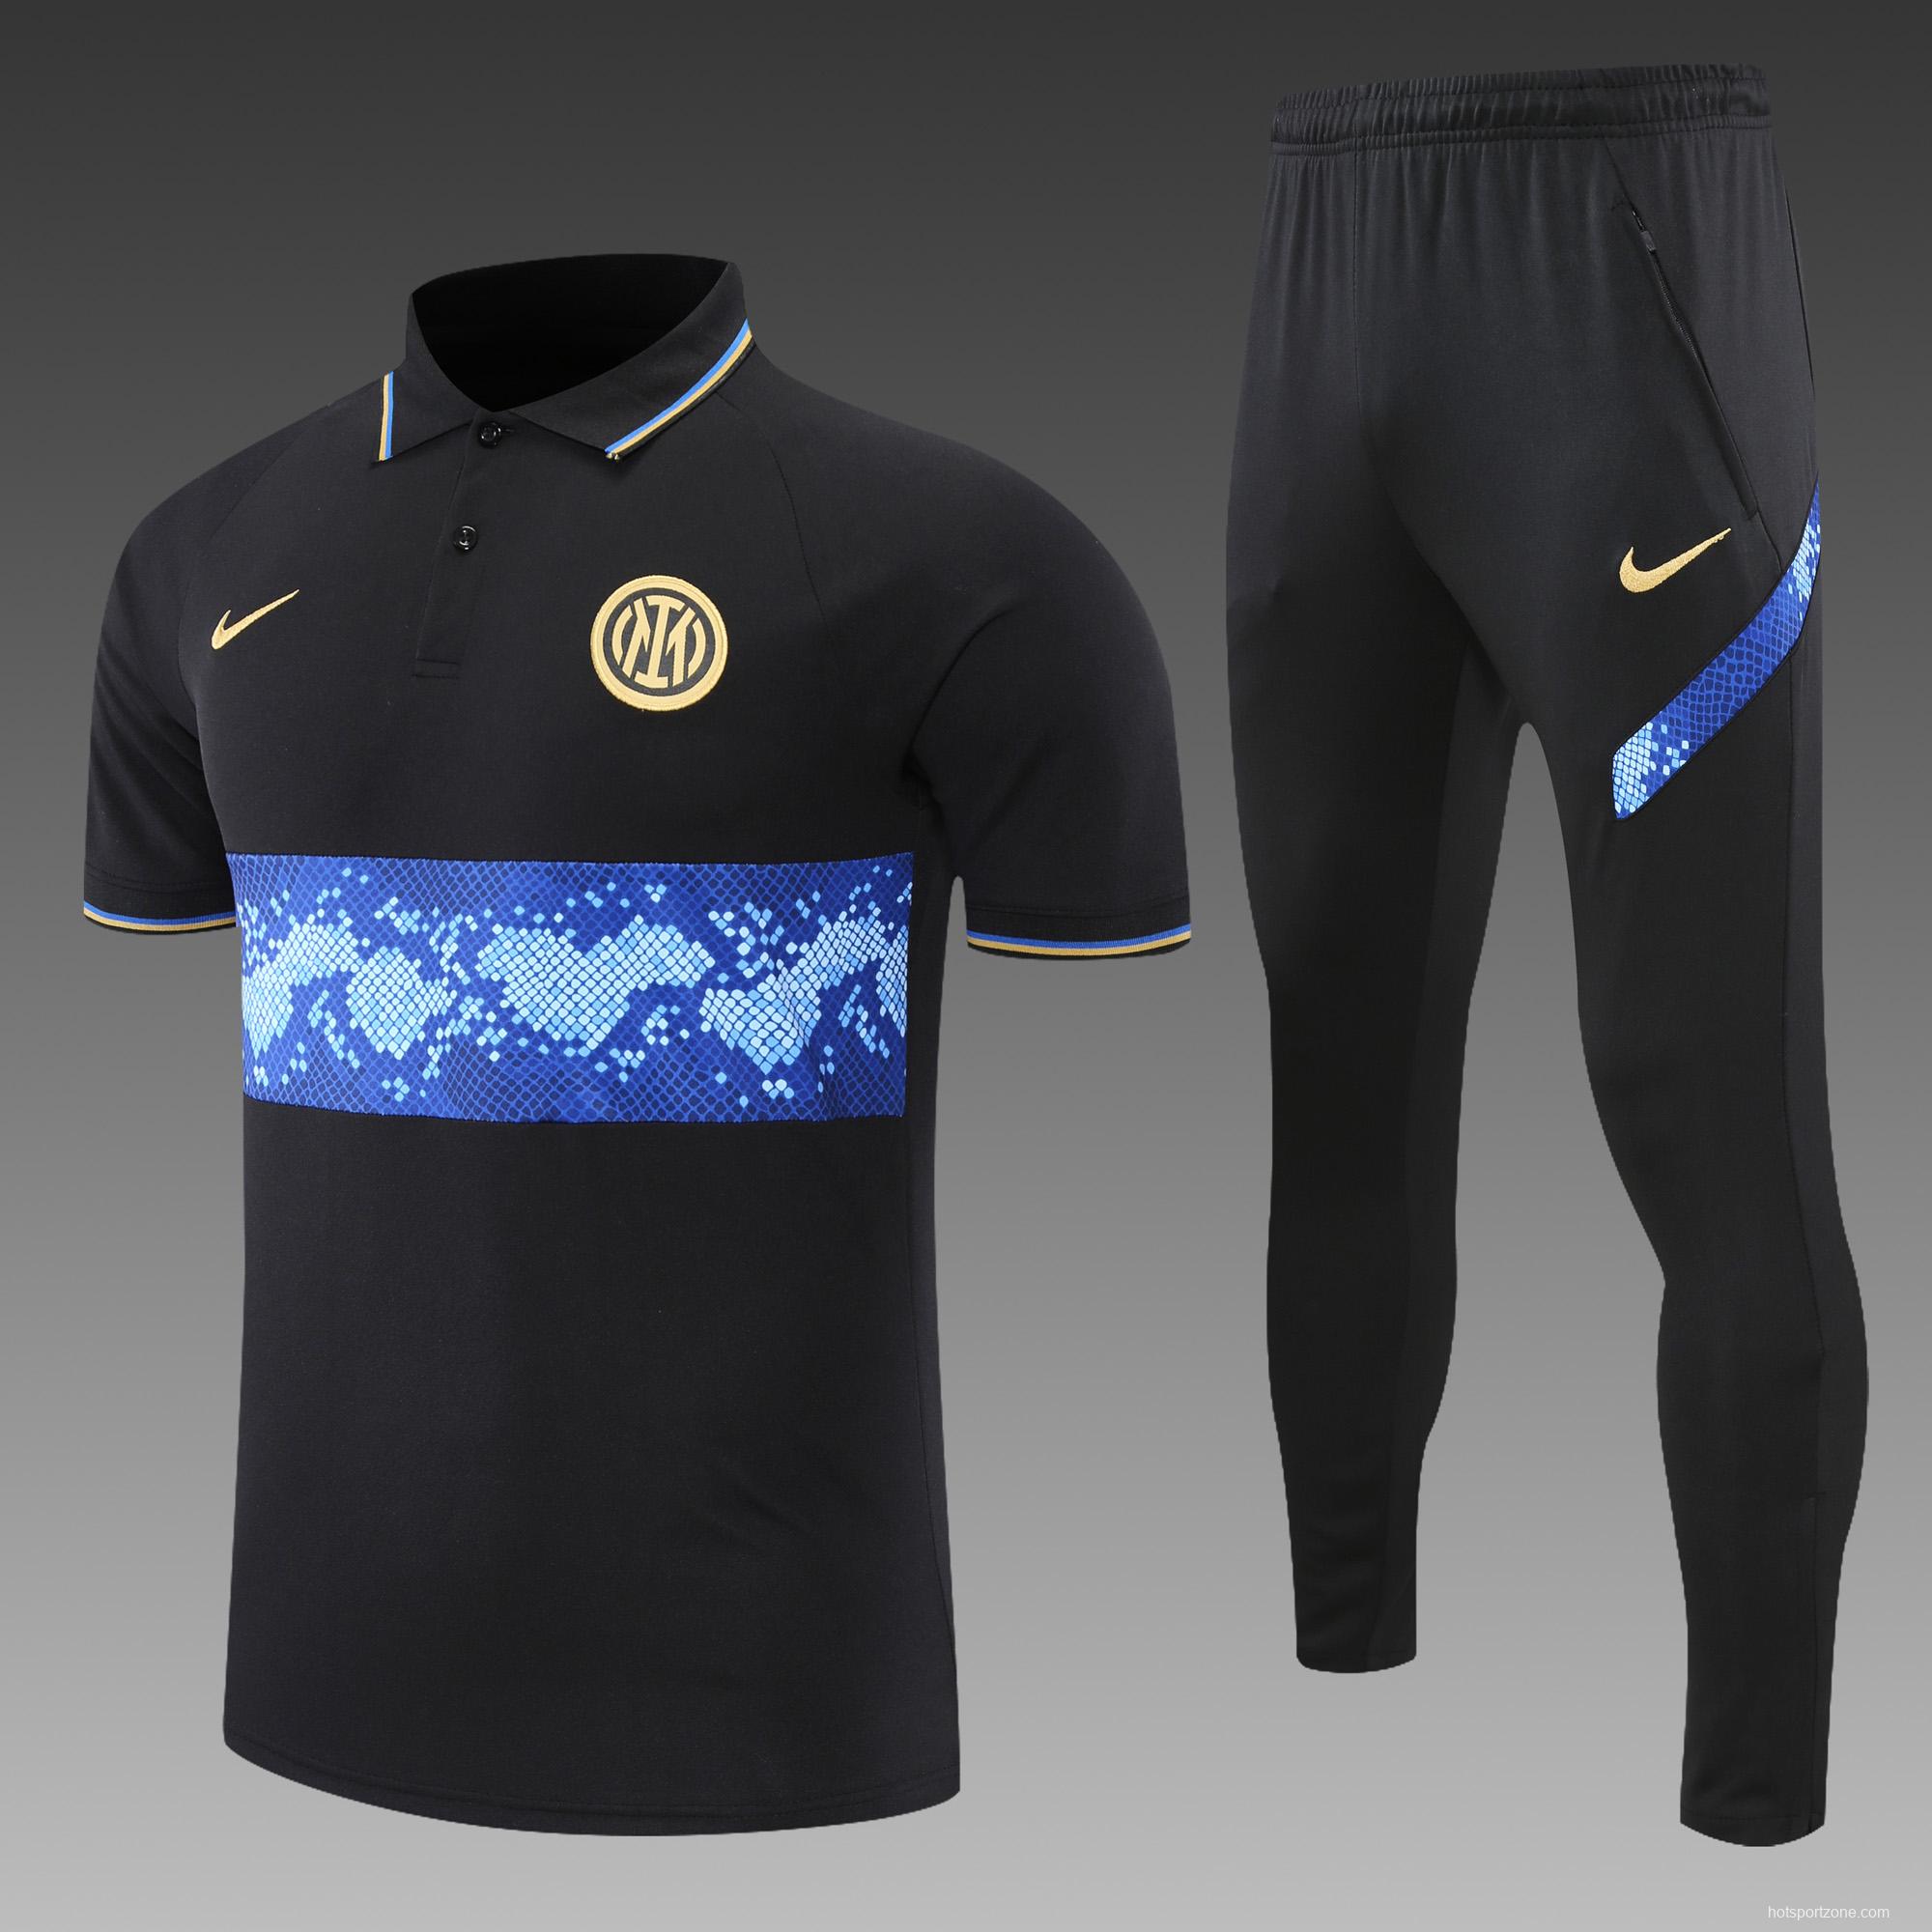 Inter Milan POLO kit black and blue pattern(not supported to be sold separately)